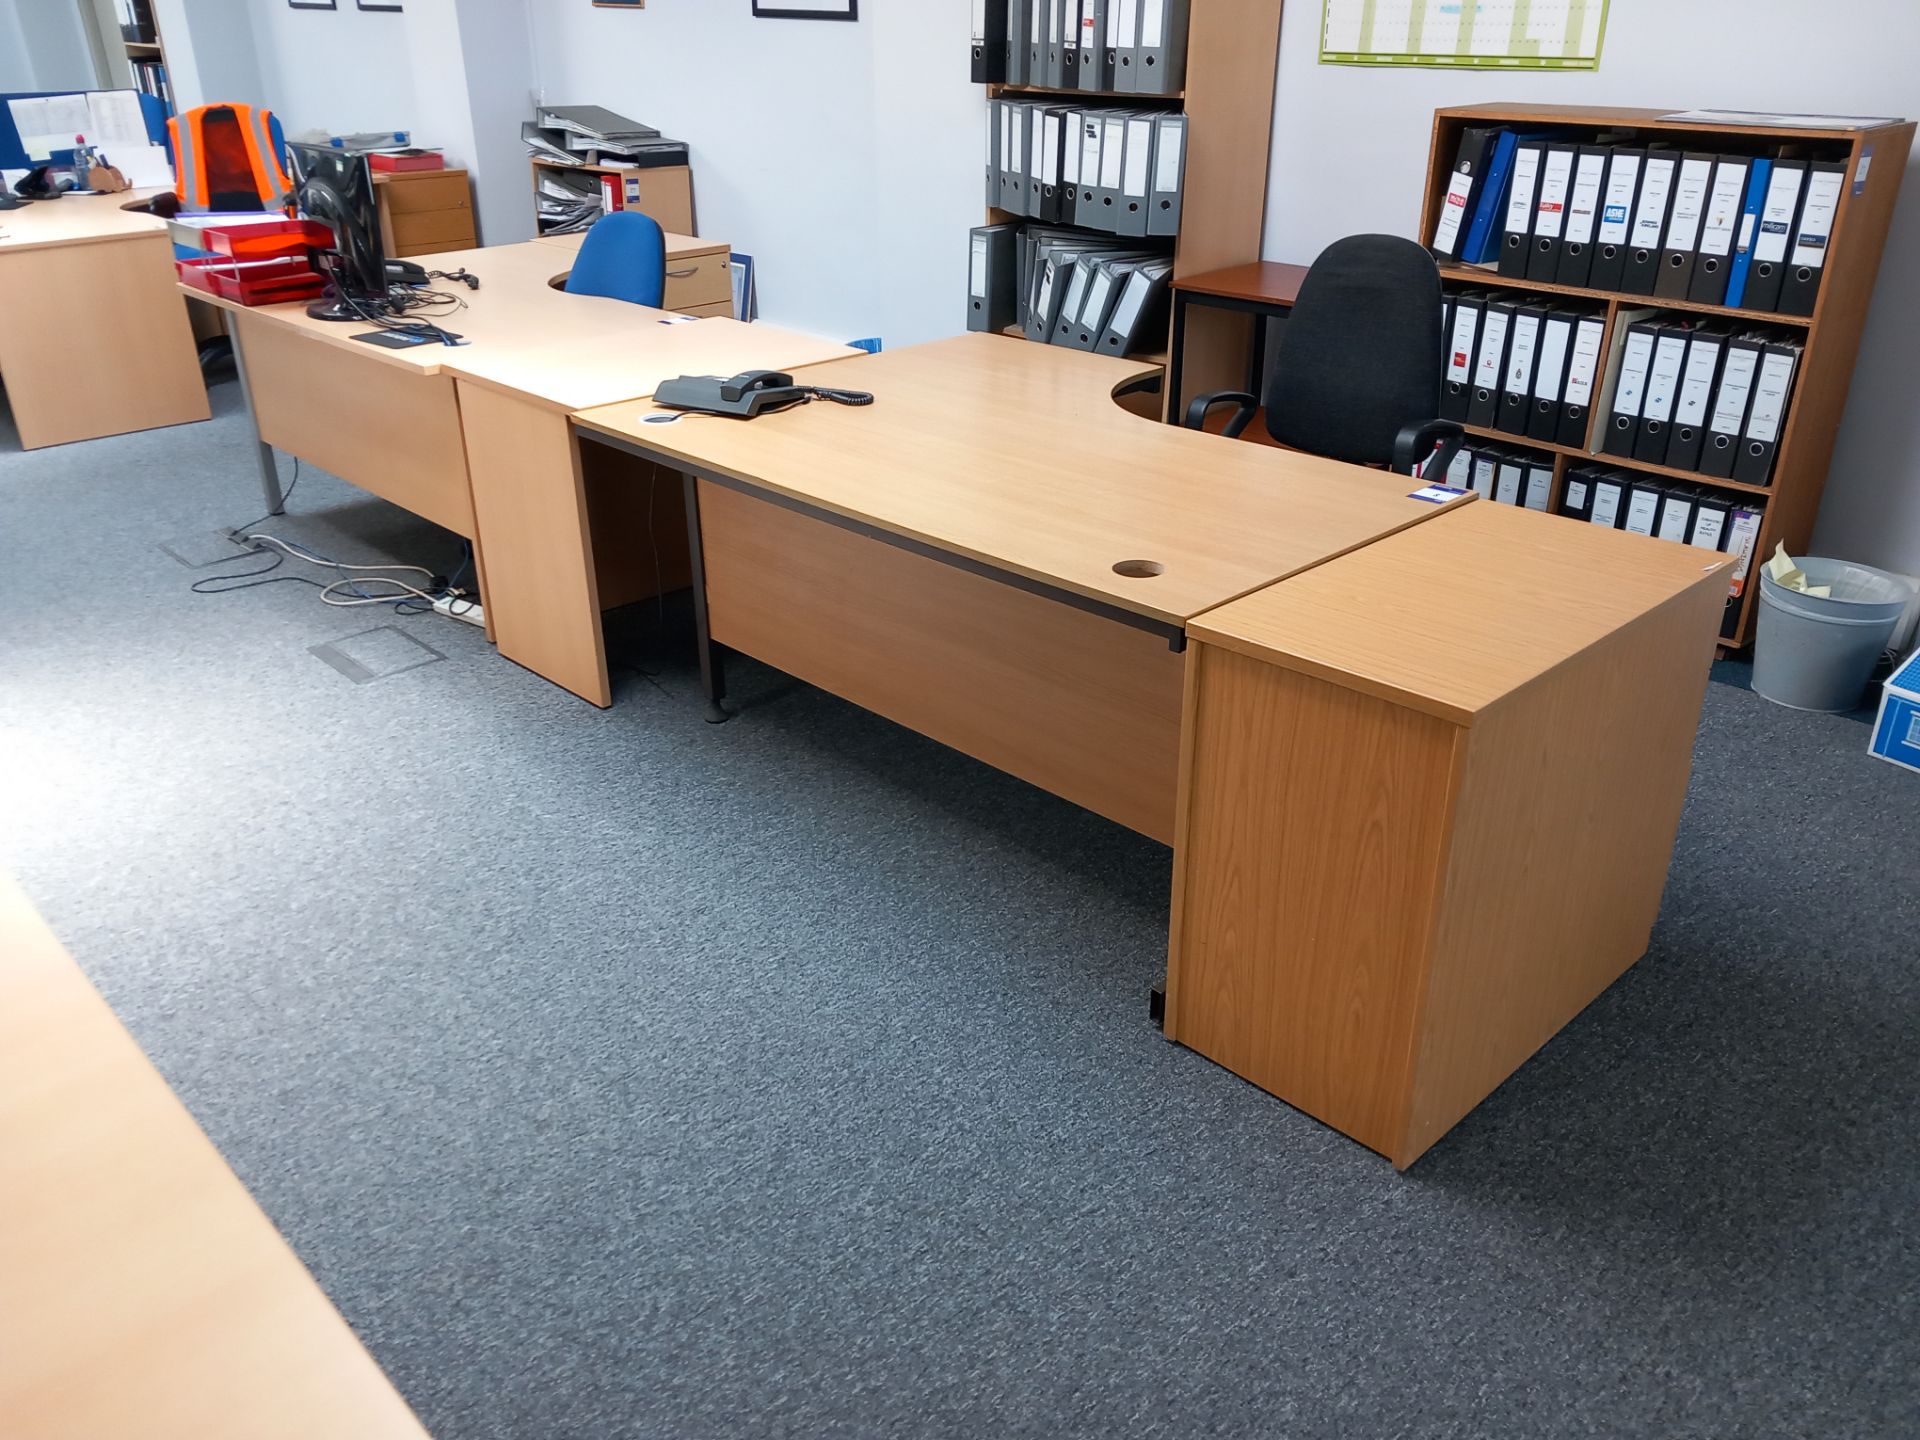 3 x Workstations to include 3 x various curved single person desks, 3 x pedestals, 3 x office